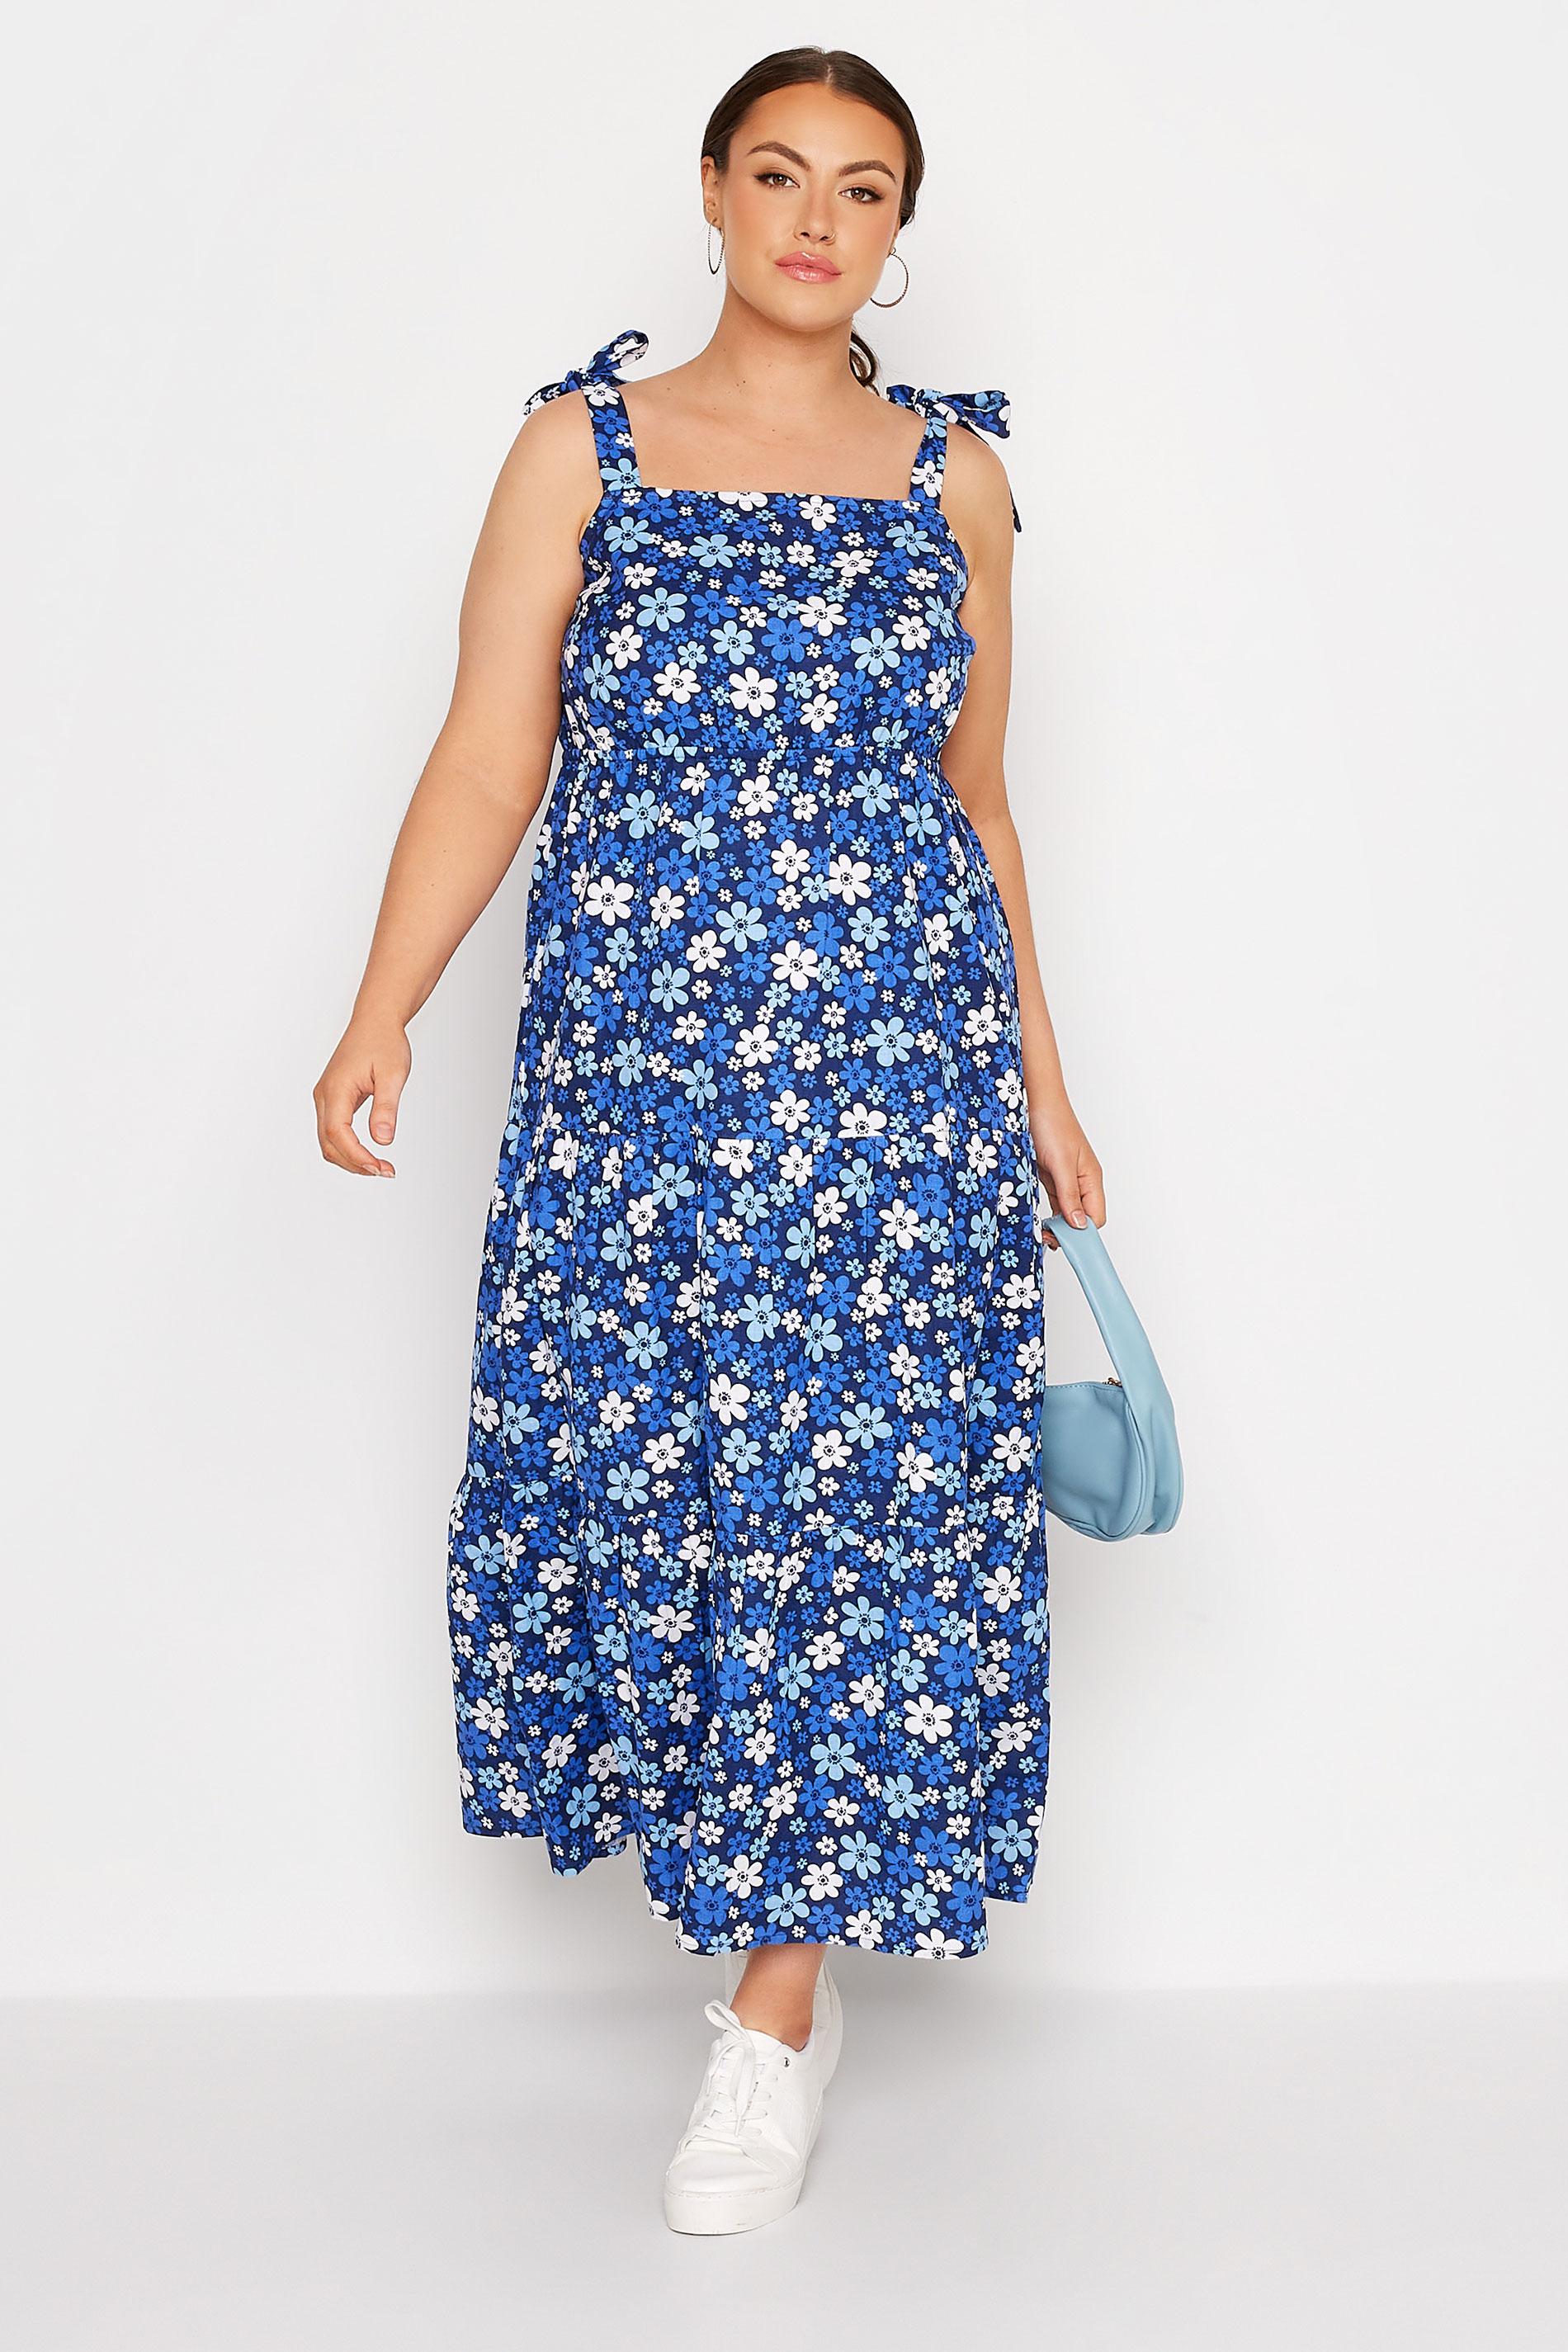 Robes Grande Taille Grande taille  Robes Imprimé Floral | LIMITED COLLECTION - Robe Bleue Marine Maxi Floral à Noeuds - ZI99301